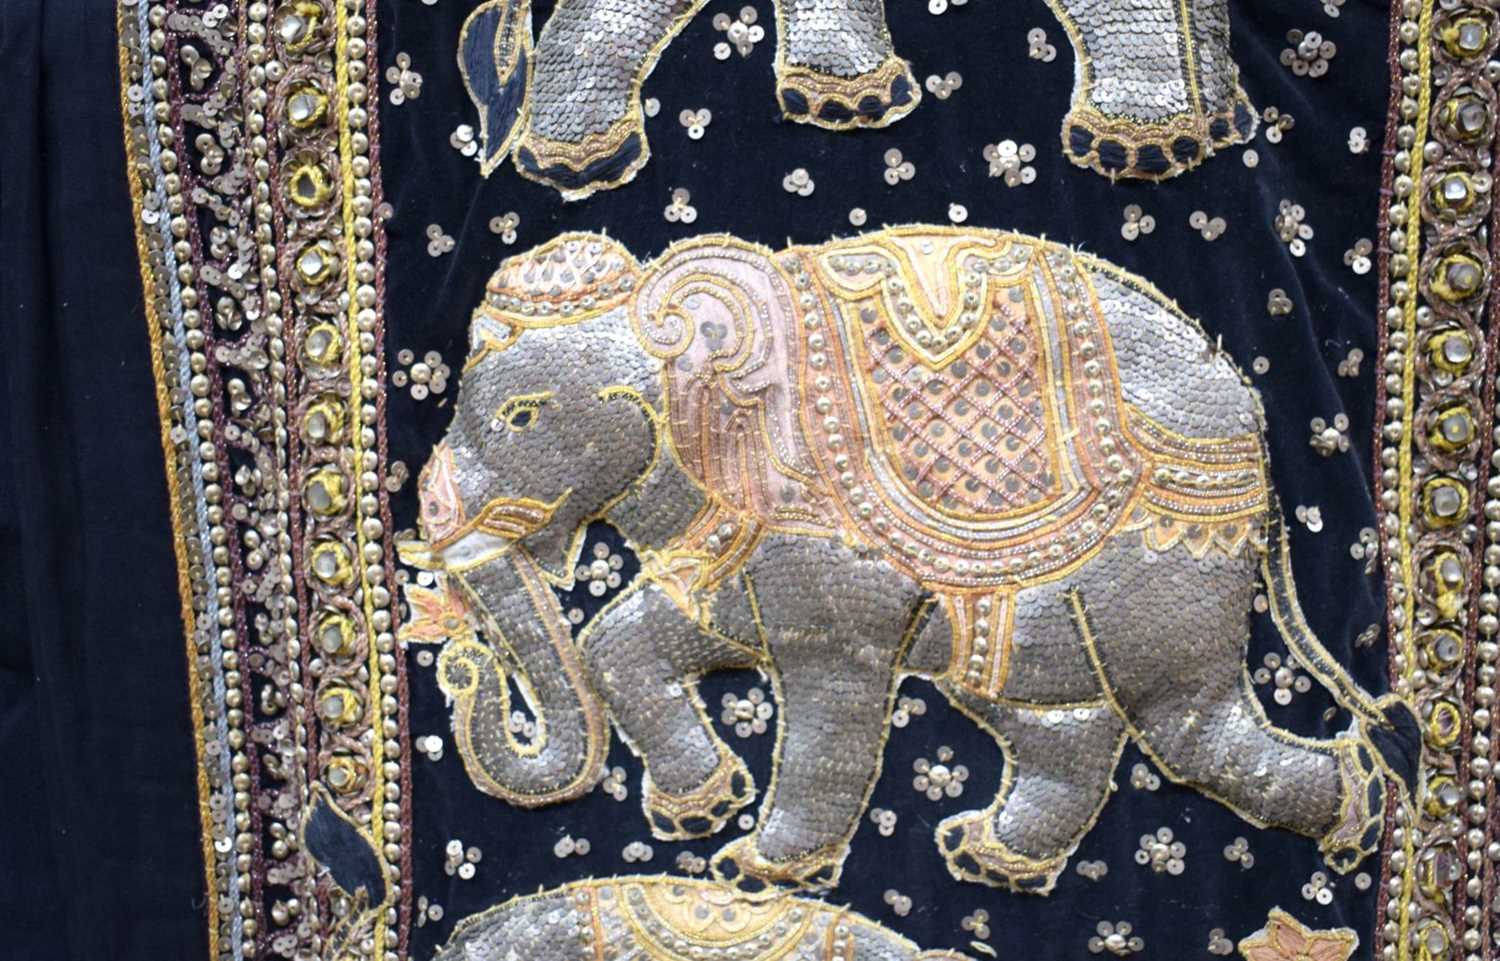 An Embroidered South East Asian Elephant wall hanging 104 x 60 cm. - Image 5 of 12